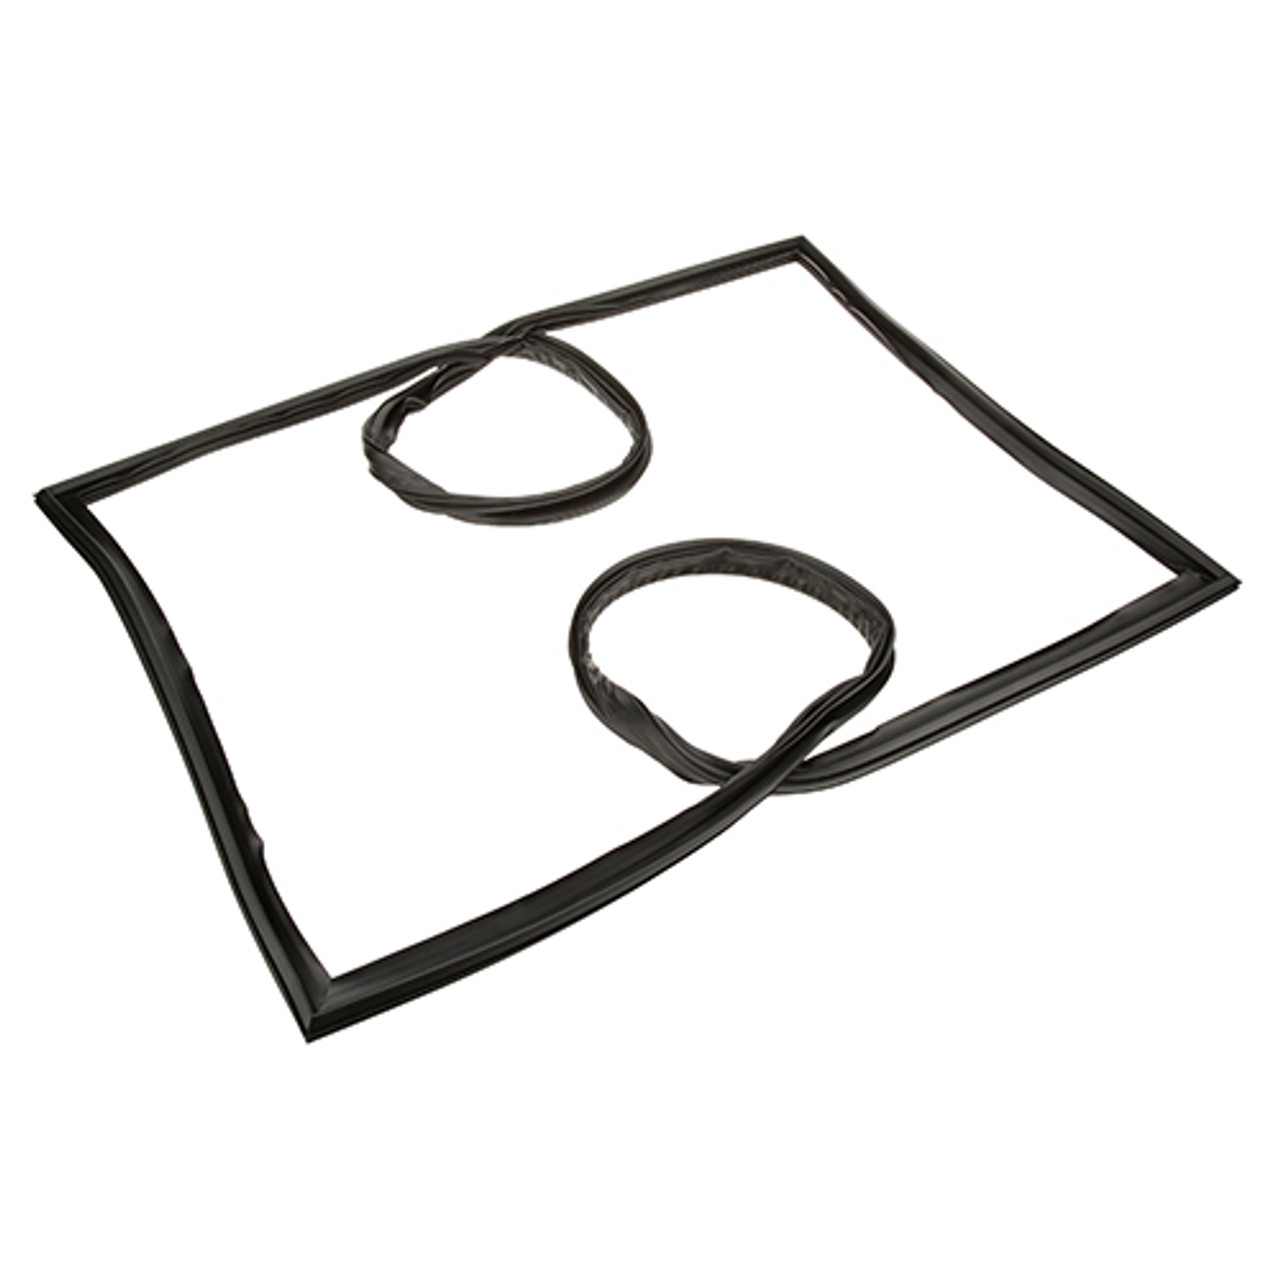 Gasket,Ref , 25-3/8"X62-3/4" - Replacement Part For True 912148